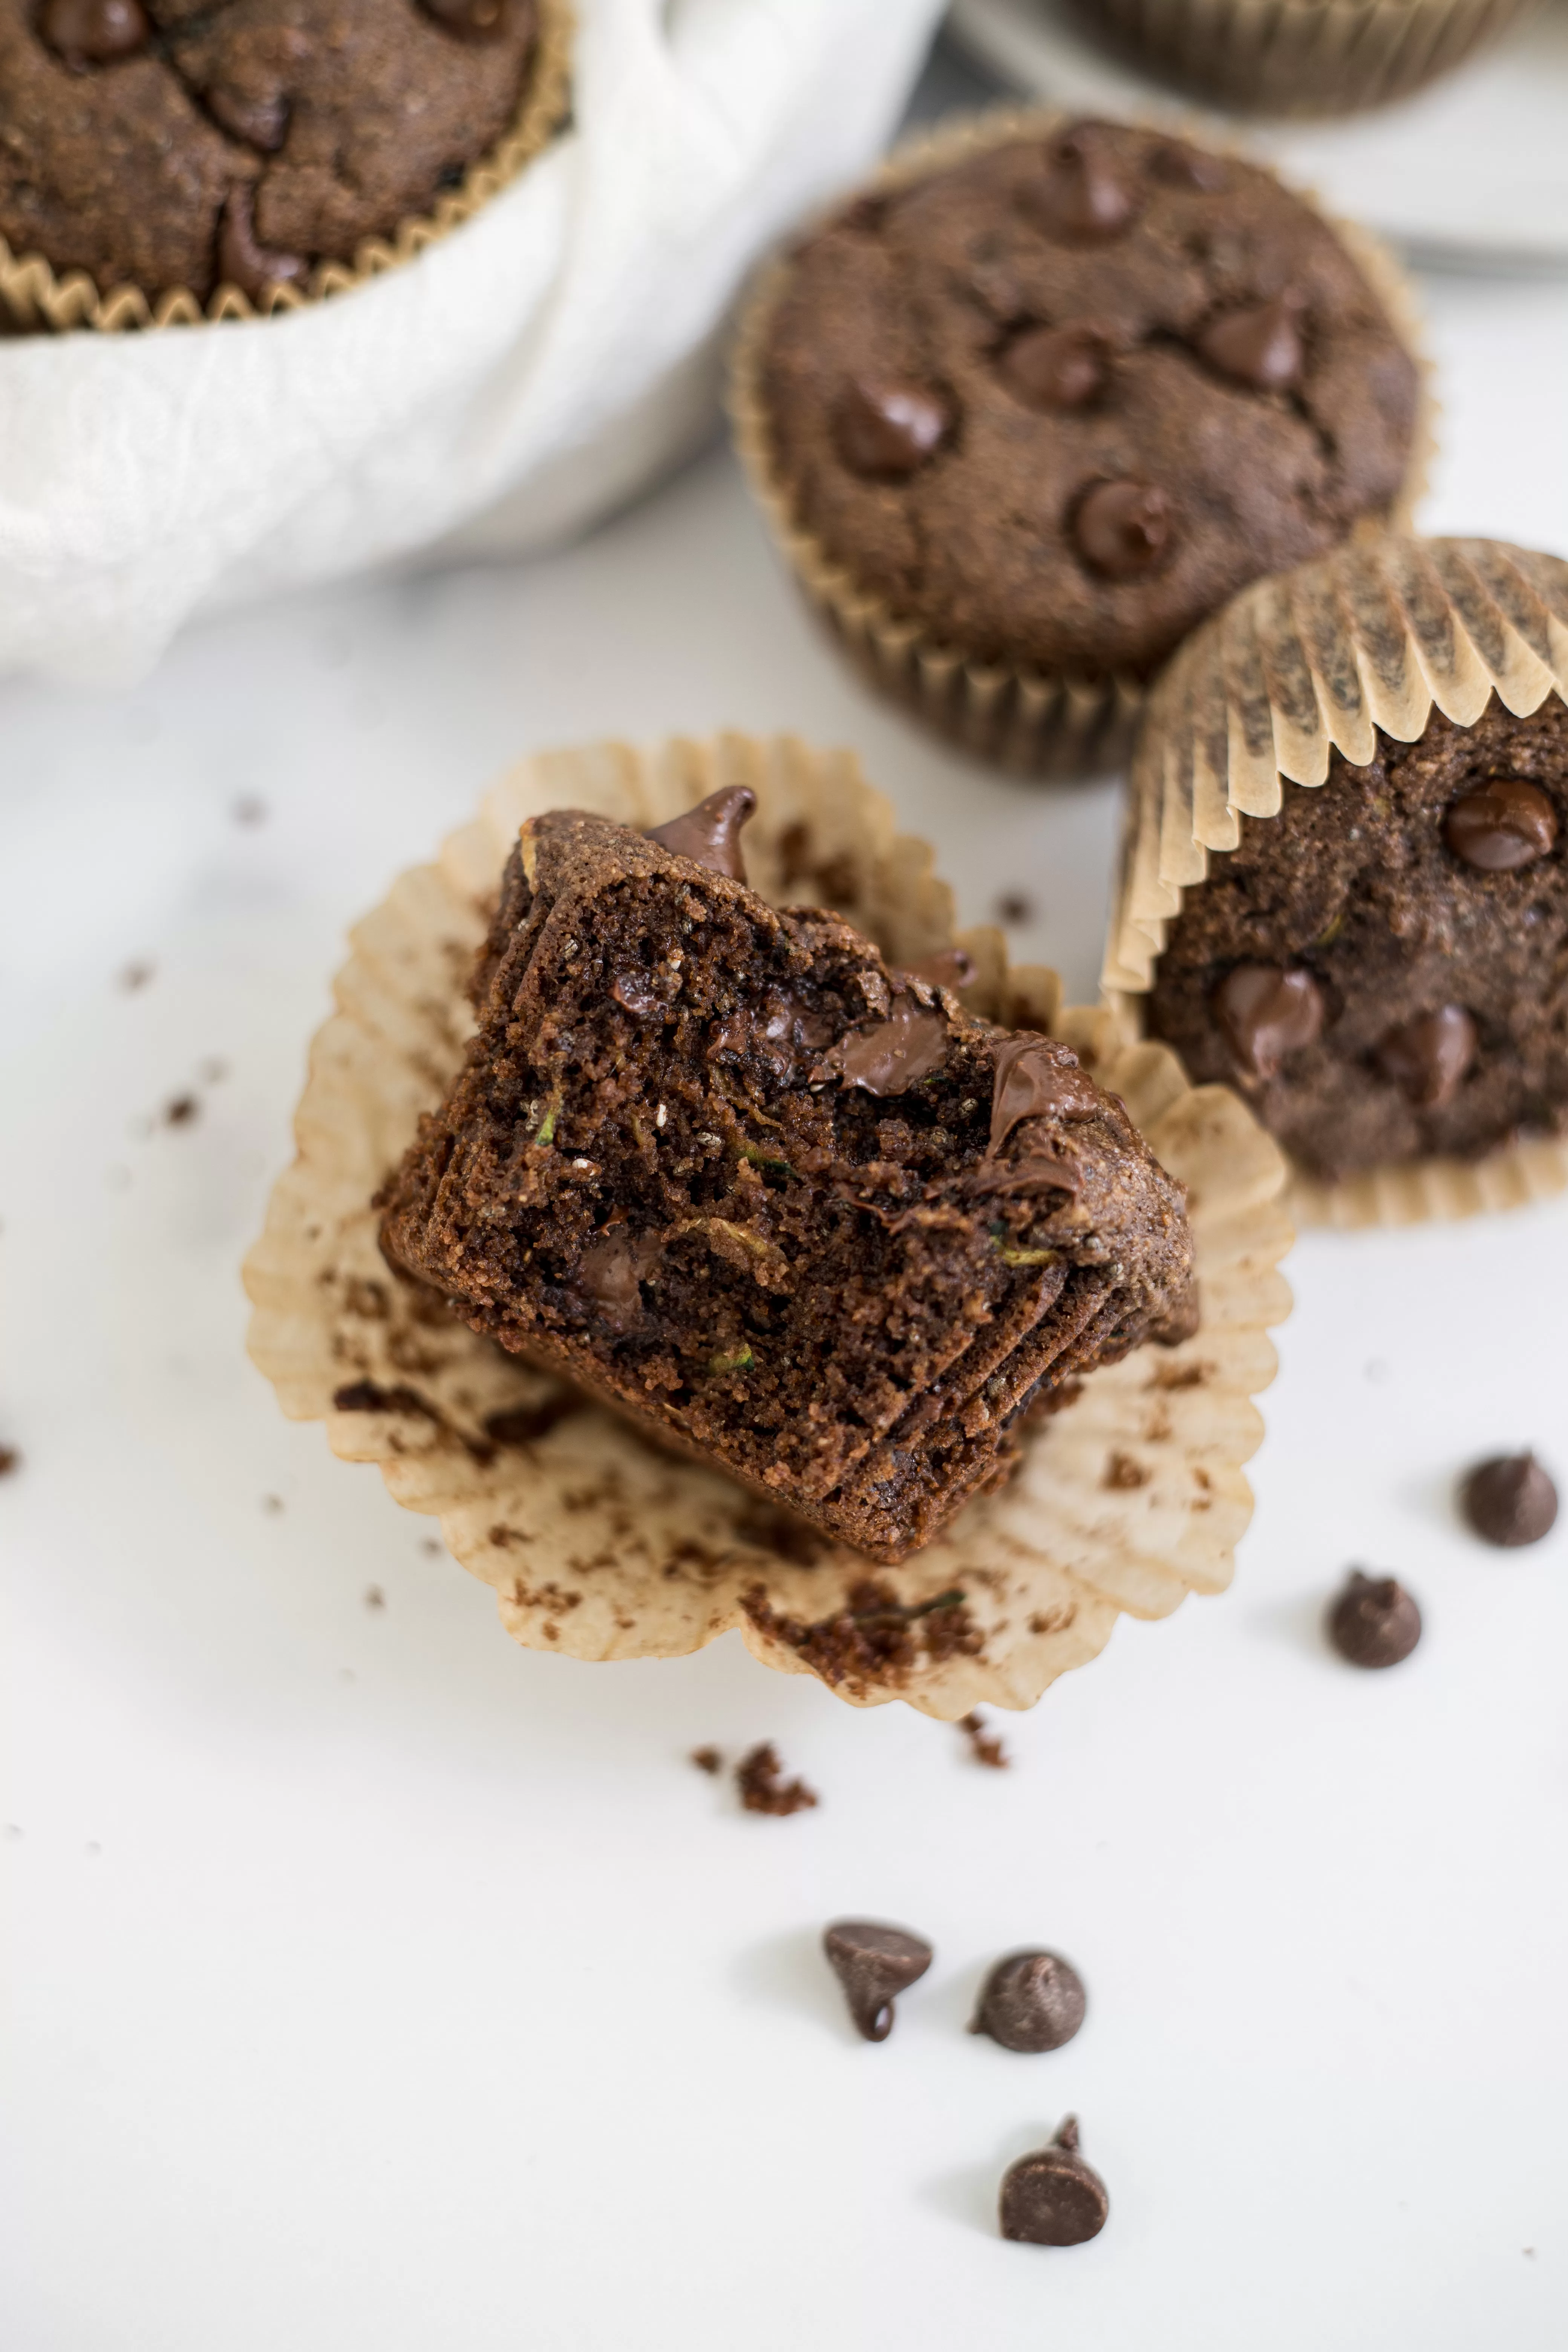 A chocolate zucchini muffin with a bite out of it.